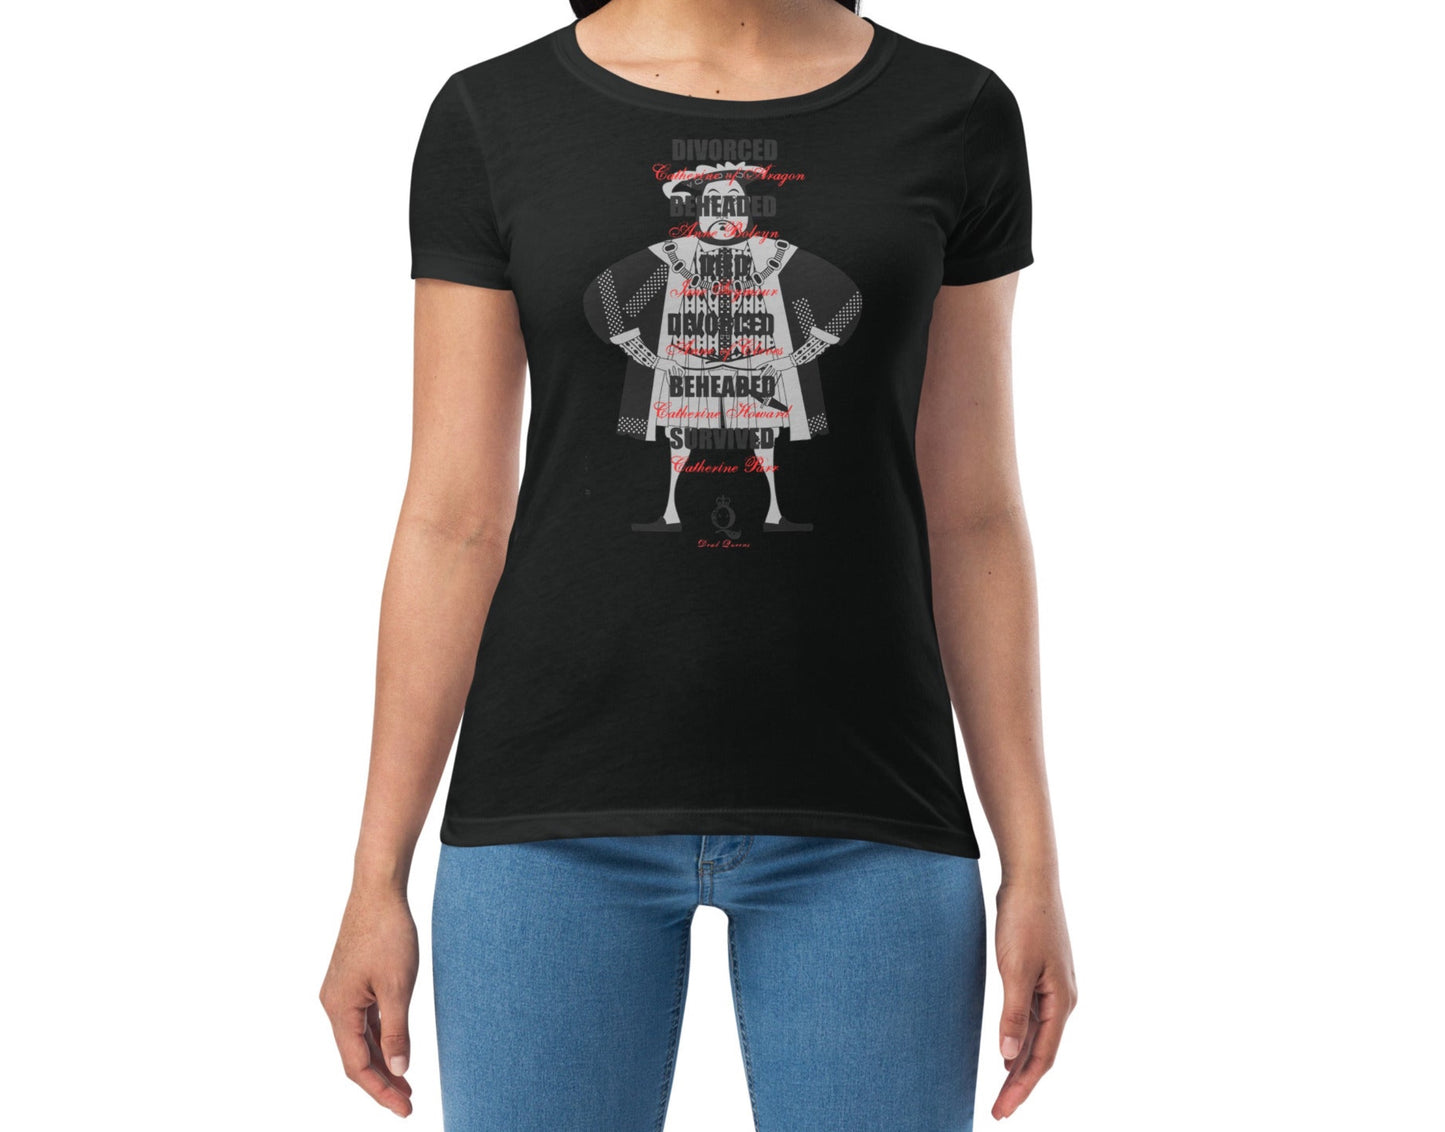 The Six Wives of Henry VIII Black Crew Neck T-Shirt